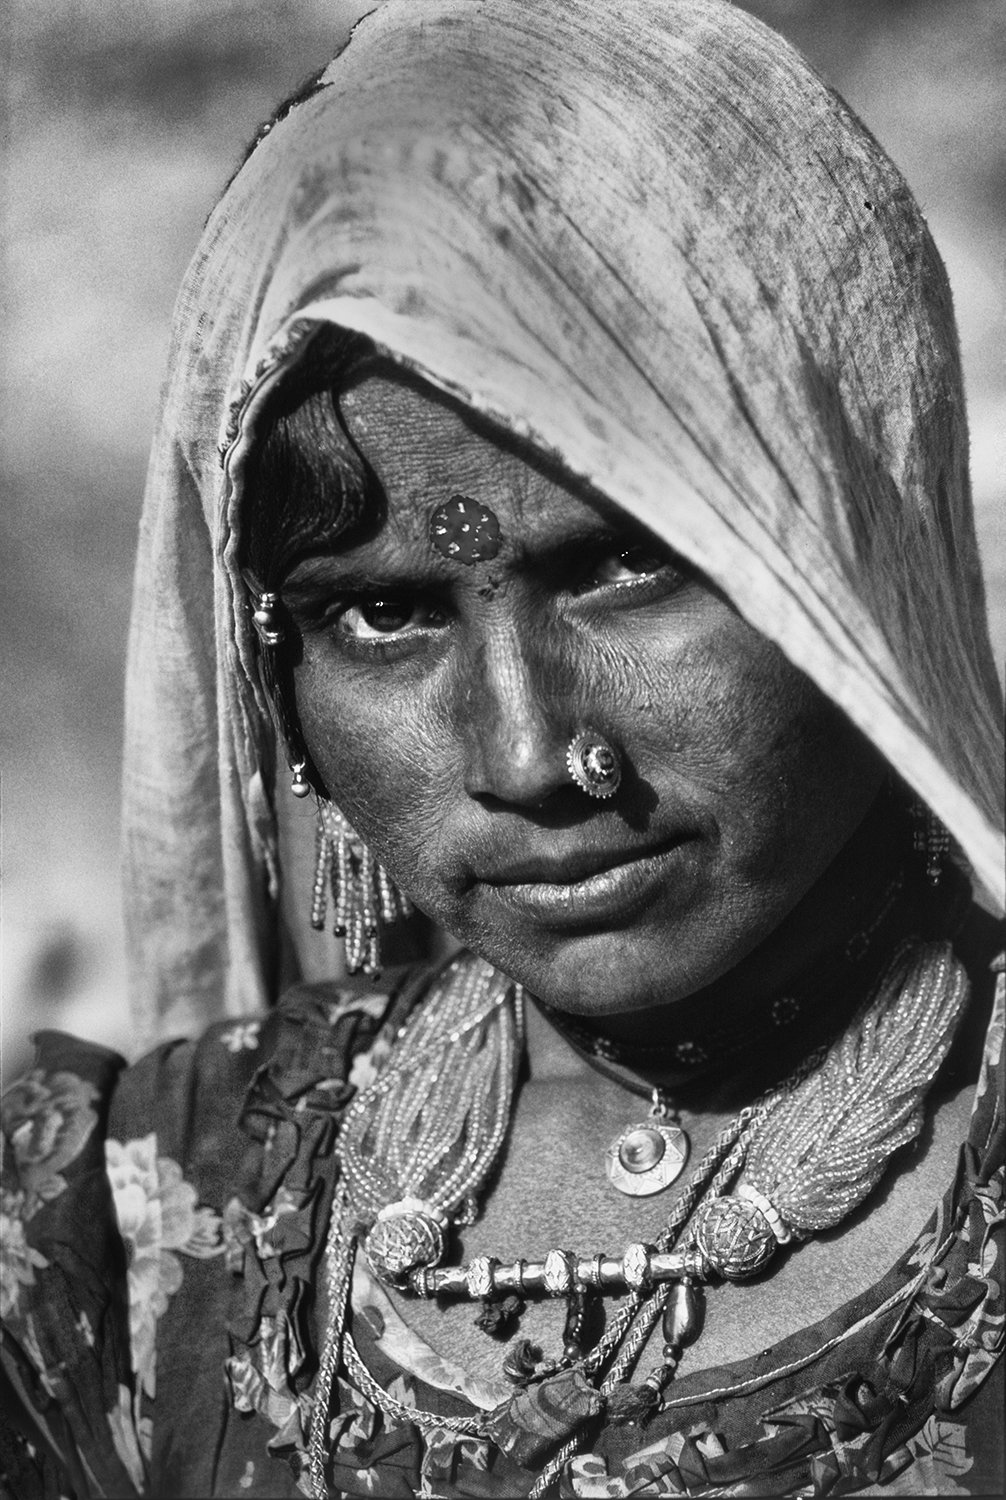 A woman from the Thar Desert located in Rajasthan, India Photography Pierre Toutain-Dorbec.jpg